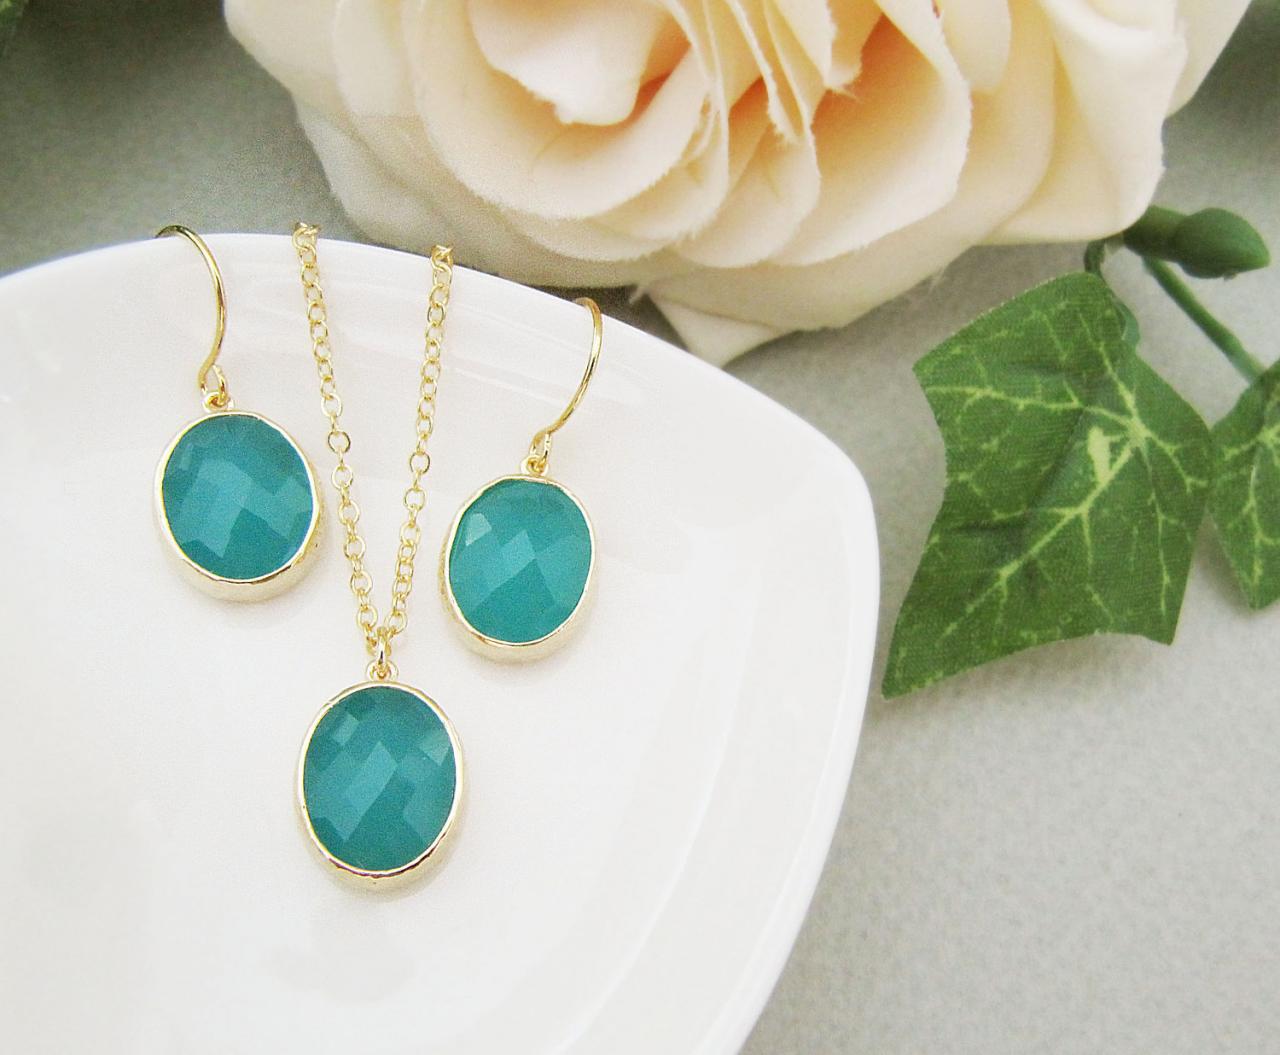 Bridesmaid Earrings Bridesmaid Necklace Bridesmaid Jewelry Set Gold Trimmed Mint Opal Glass Jewelry Set